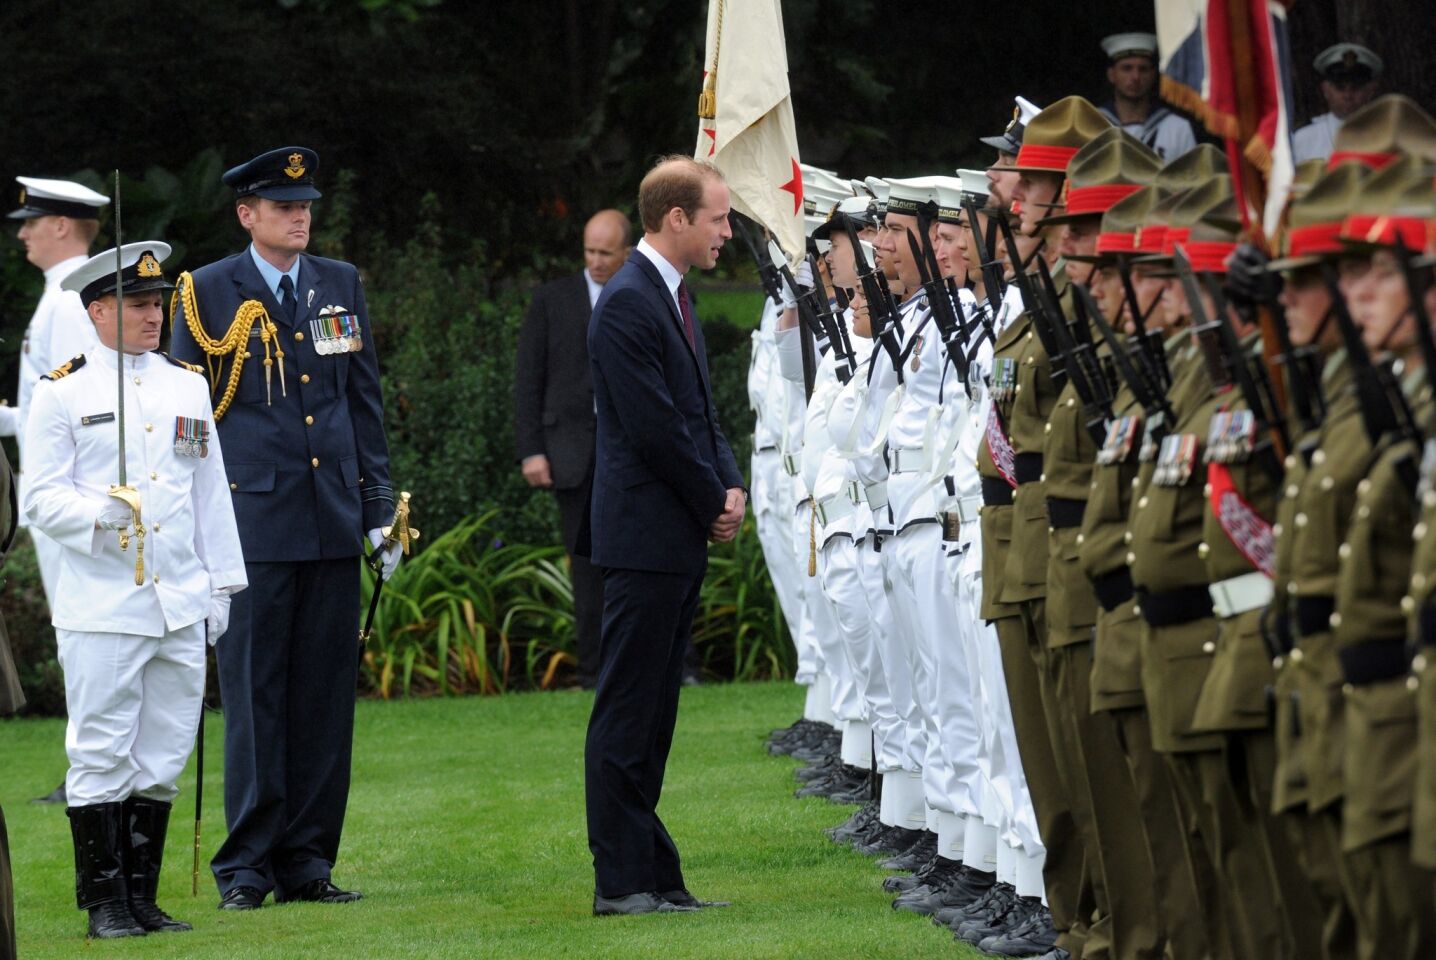 Prince William reviews an honor guard at the official welcome at Government House in Wellington, New Zealand.